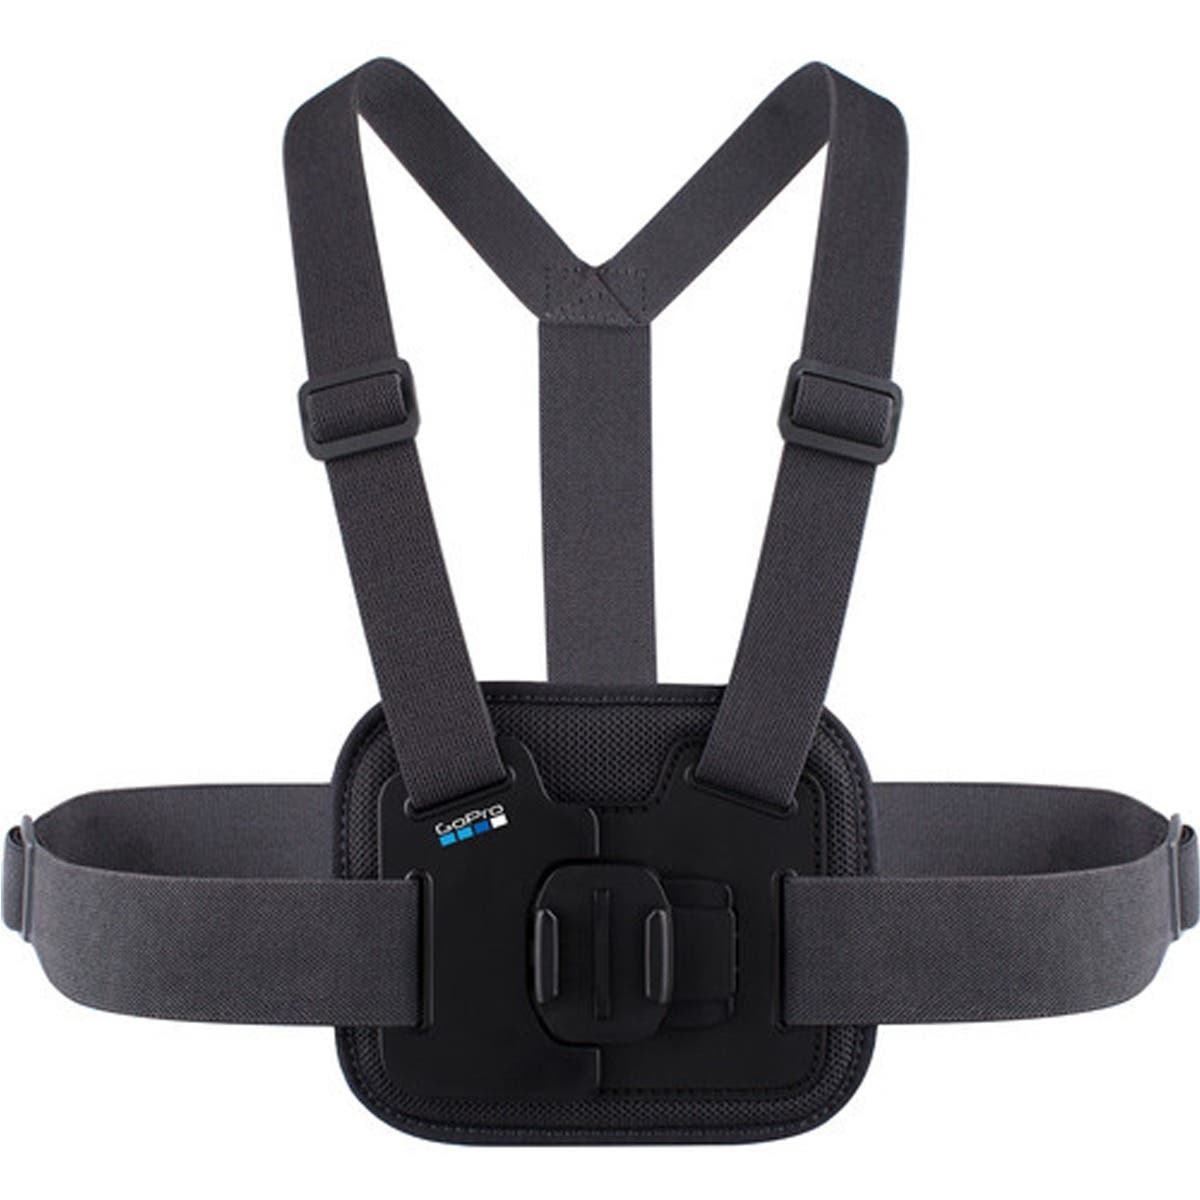 GoPro Chesty Harness (Performance Chest Mount)